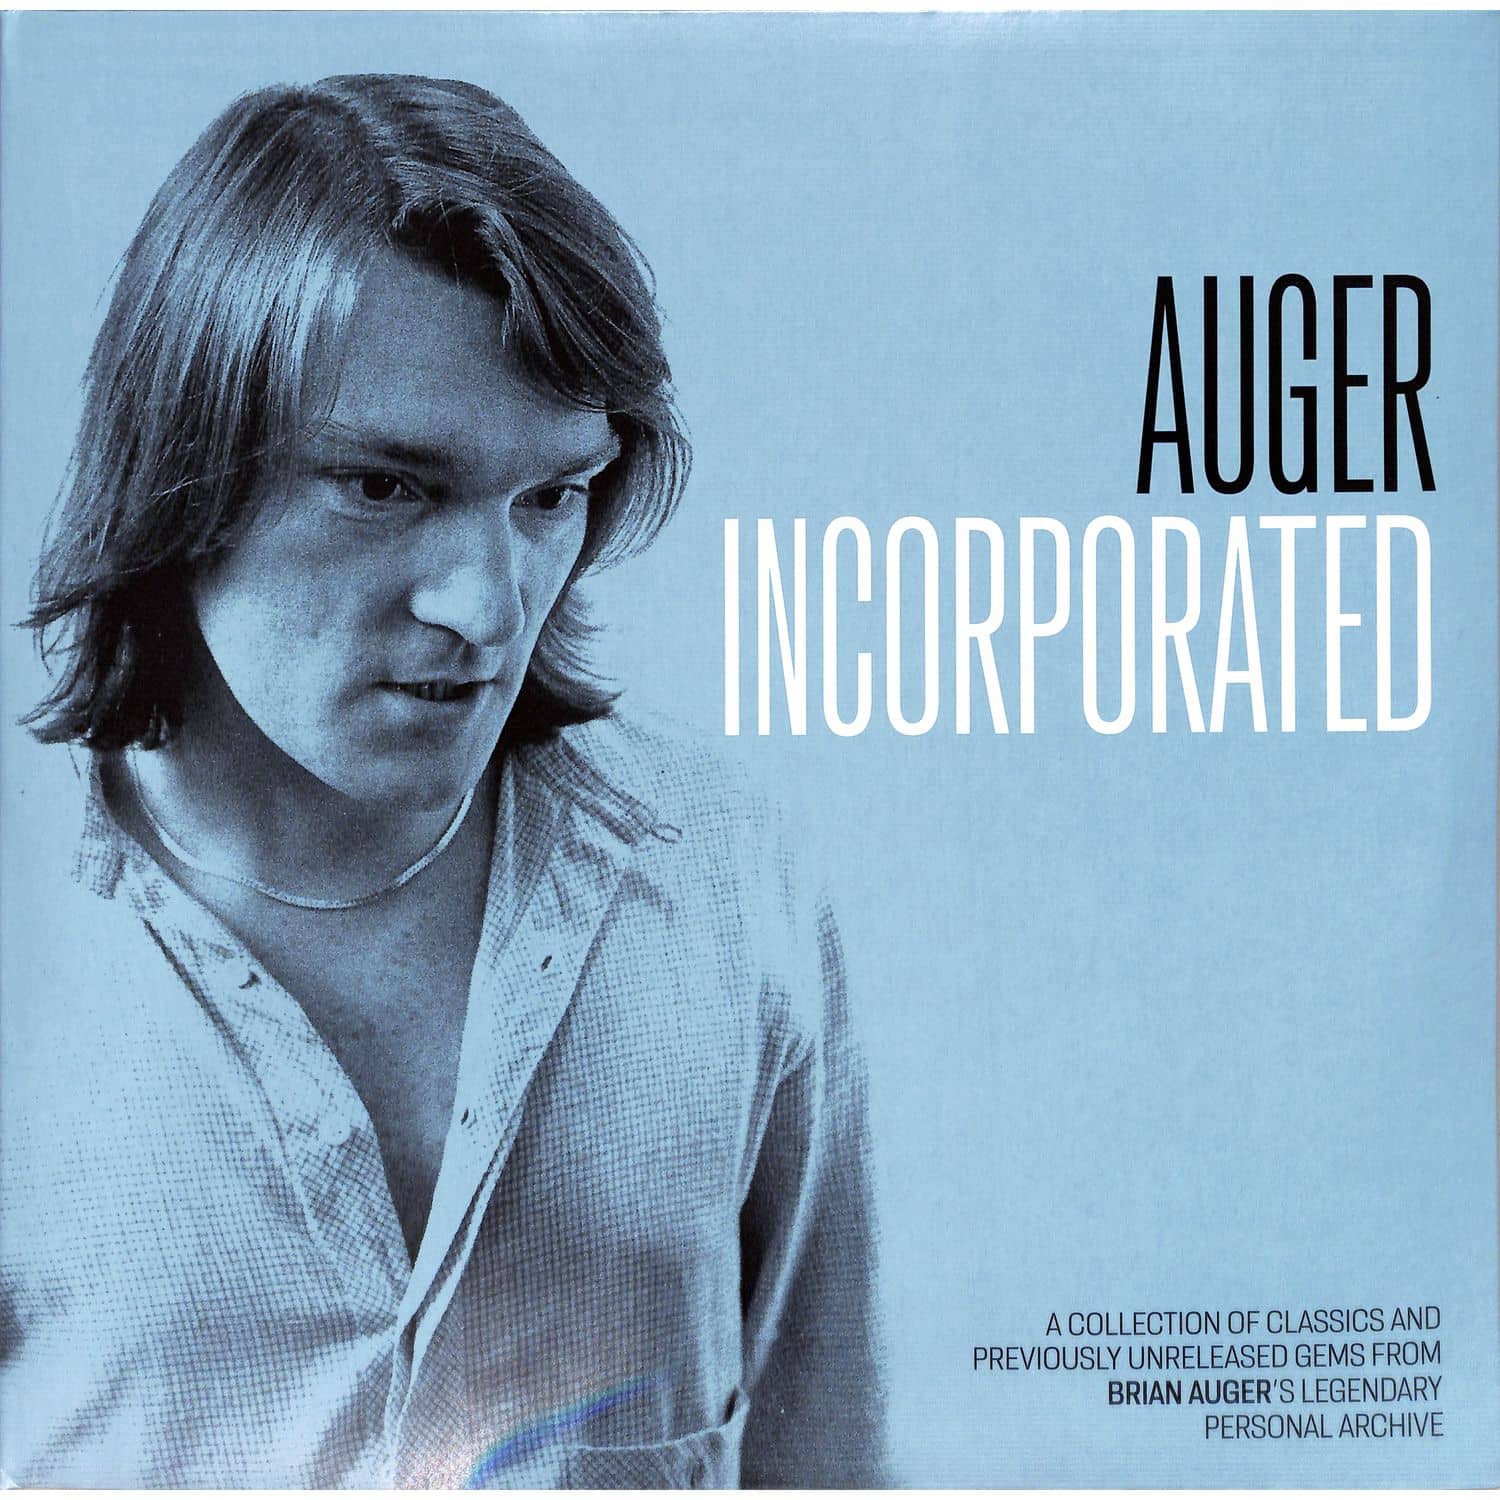 Brian Auger - AUGER INCORPORATED 